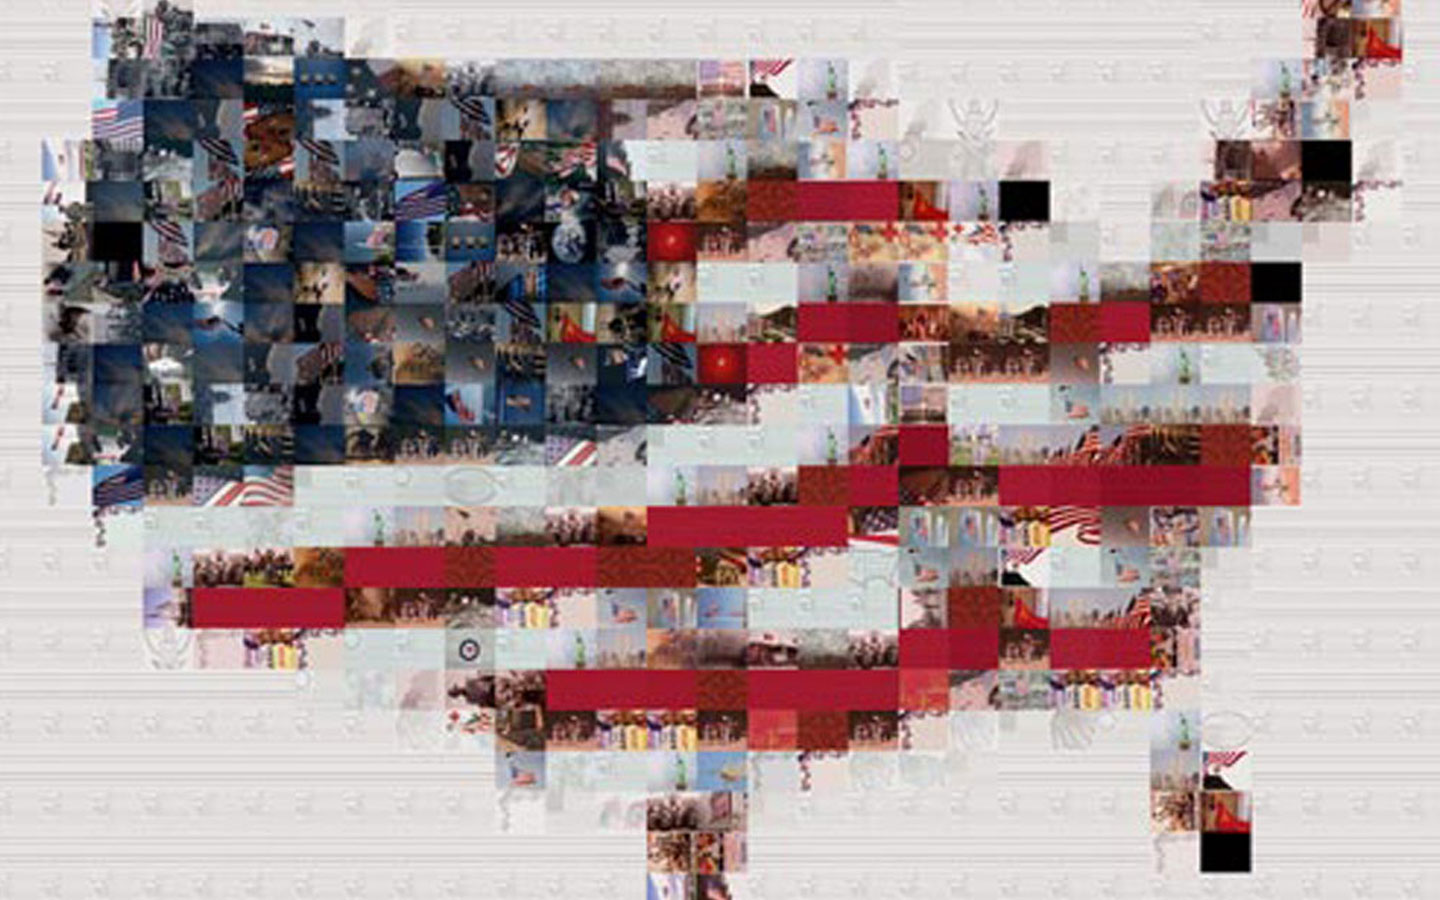 United State of America (USA) Flag Picture